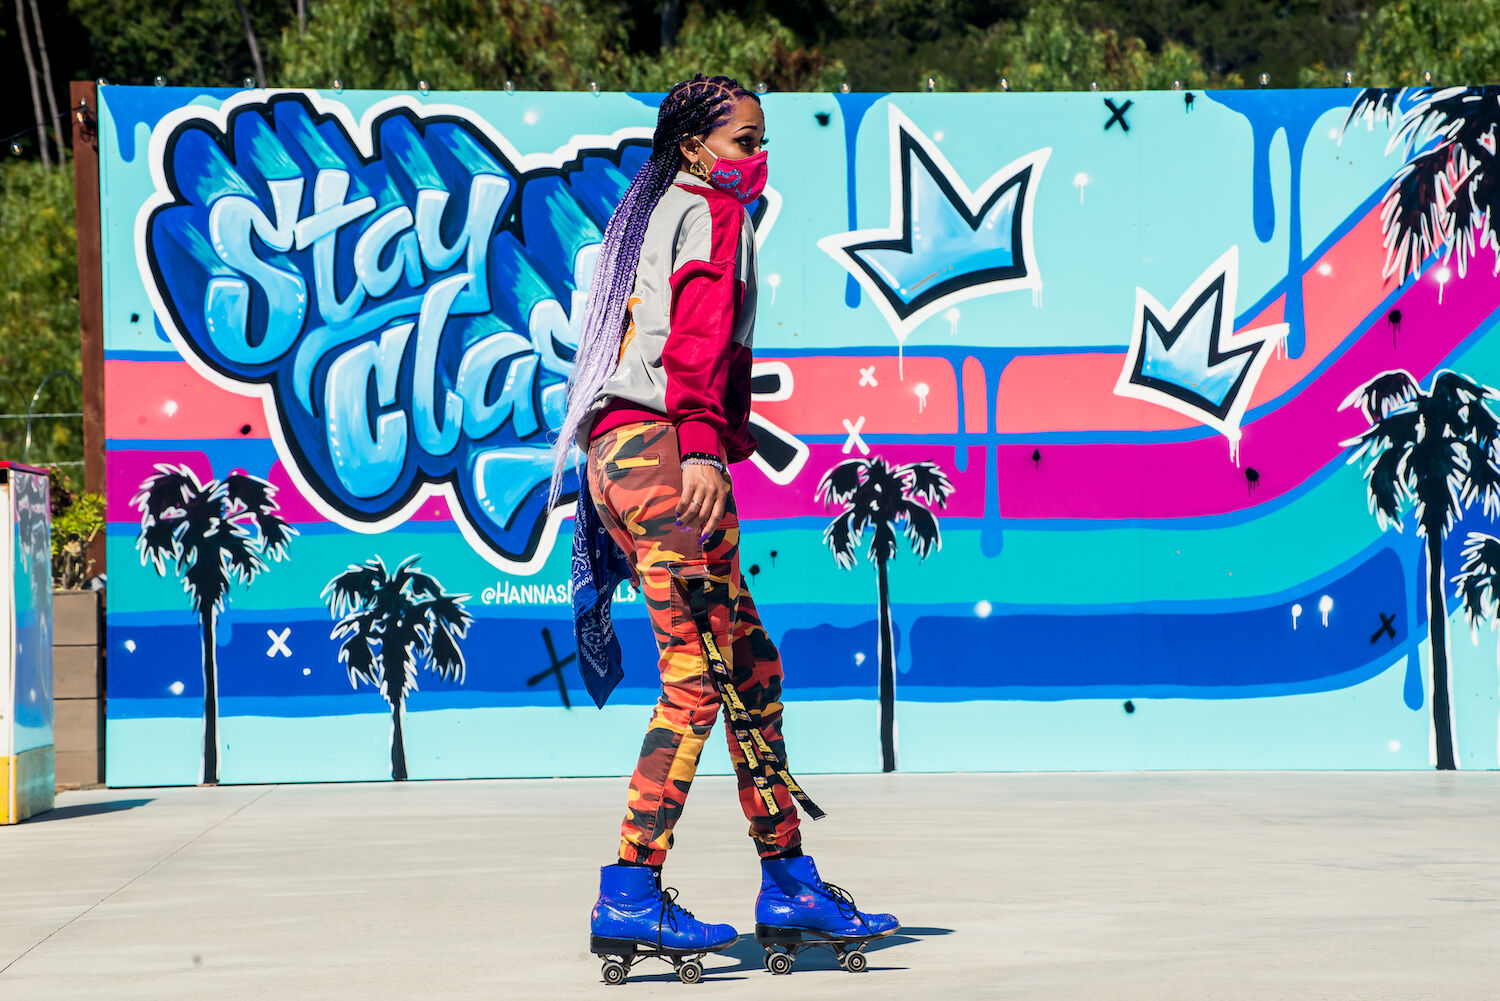 Why San Diego's Roller Skating Scene Is Here to Stay - San Diego Magazine